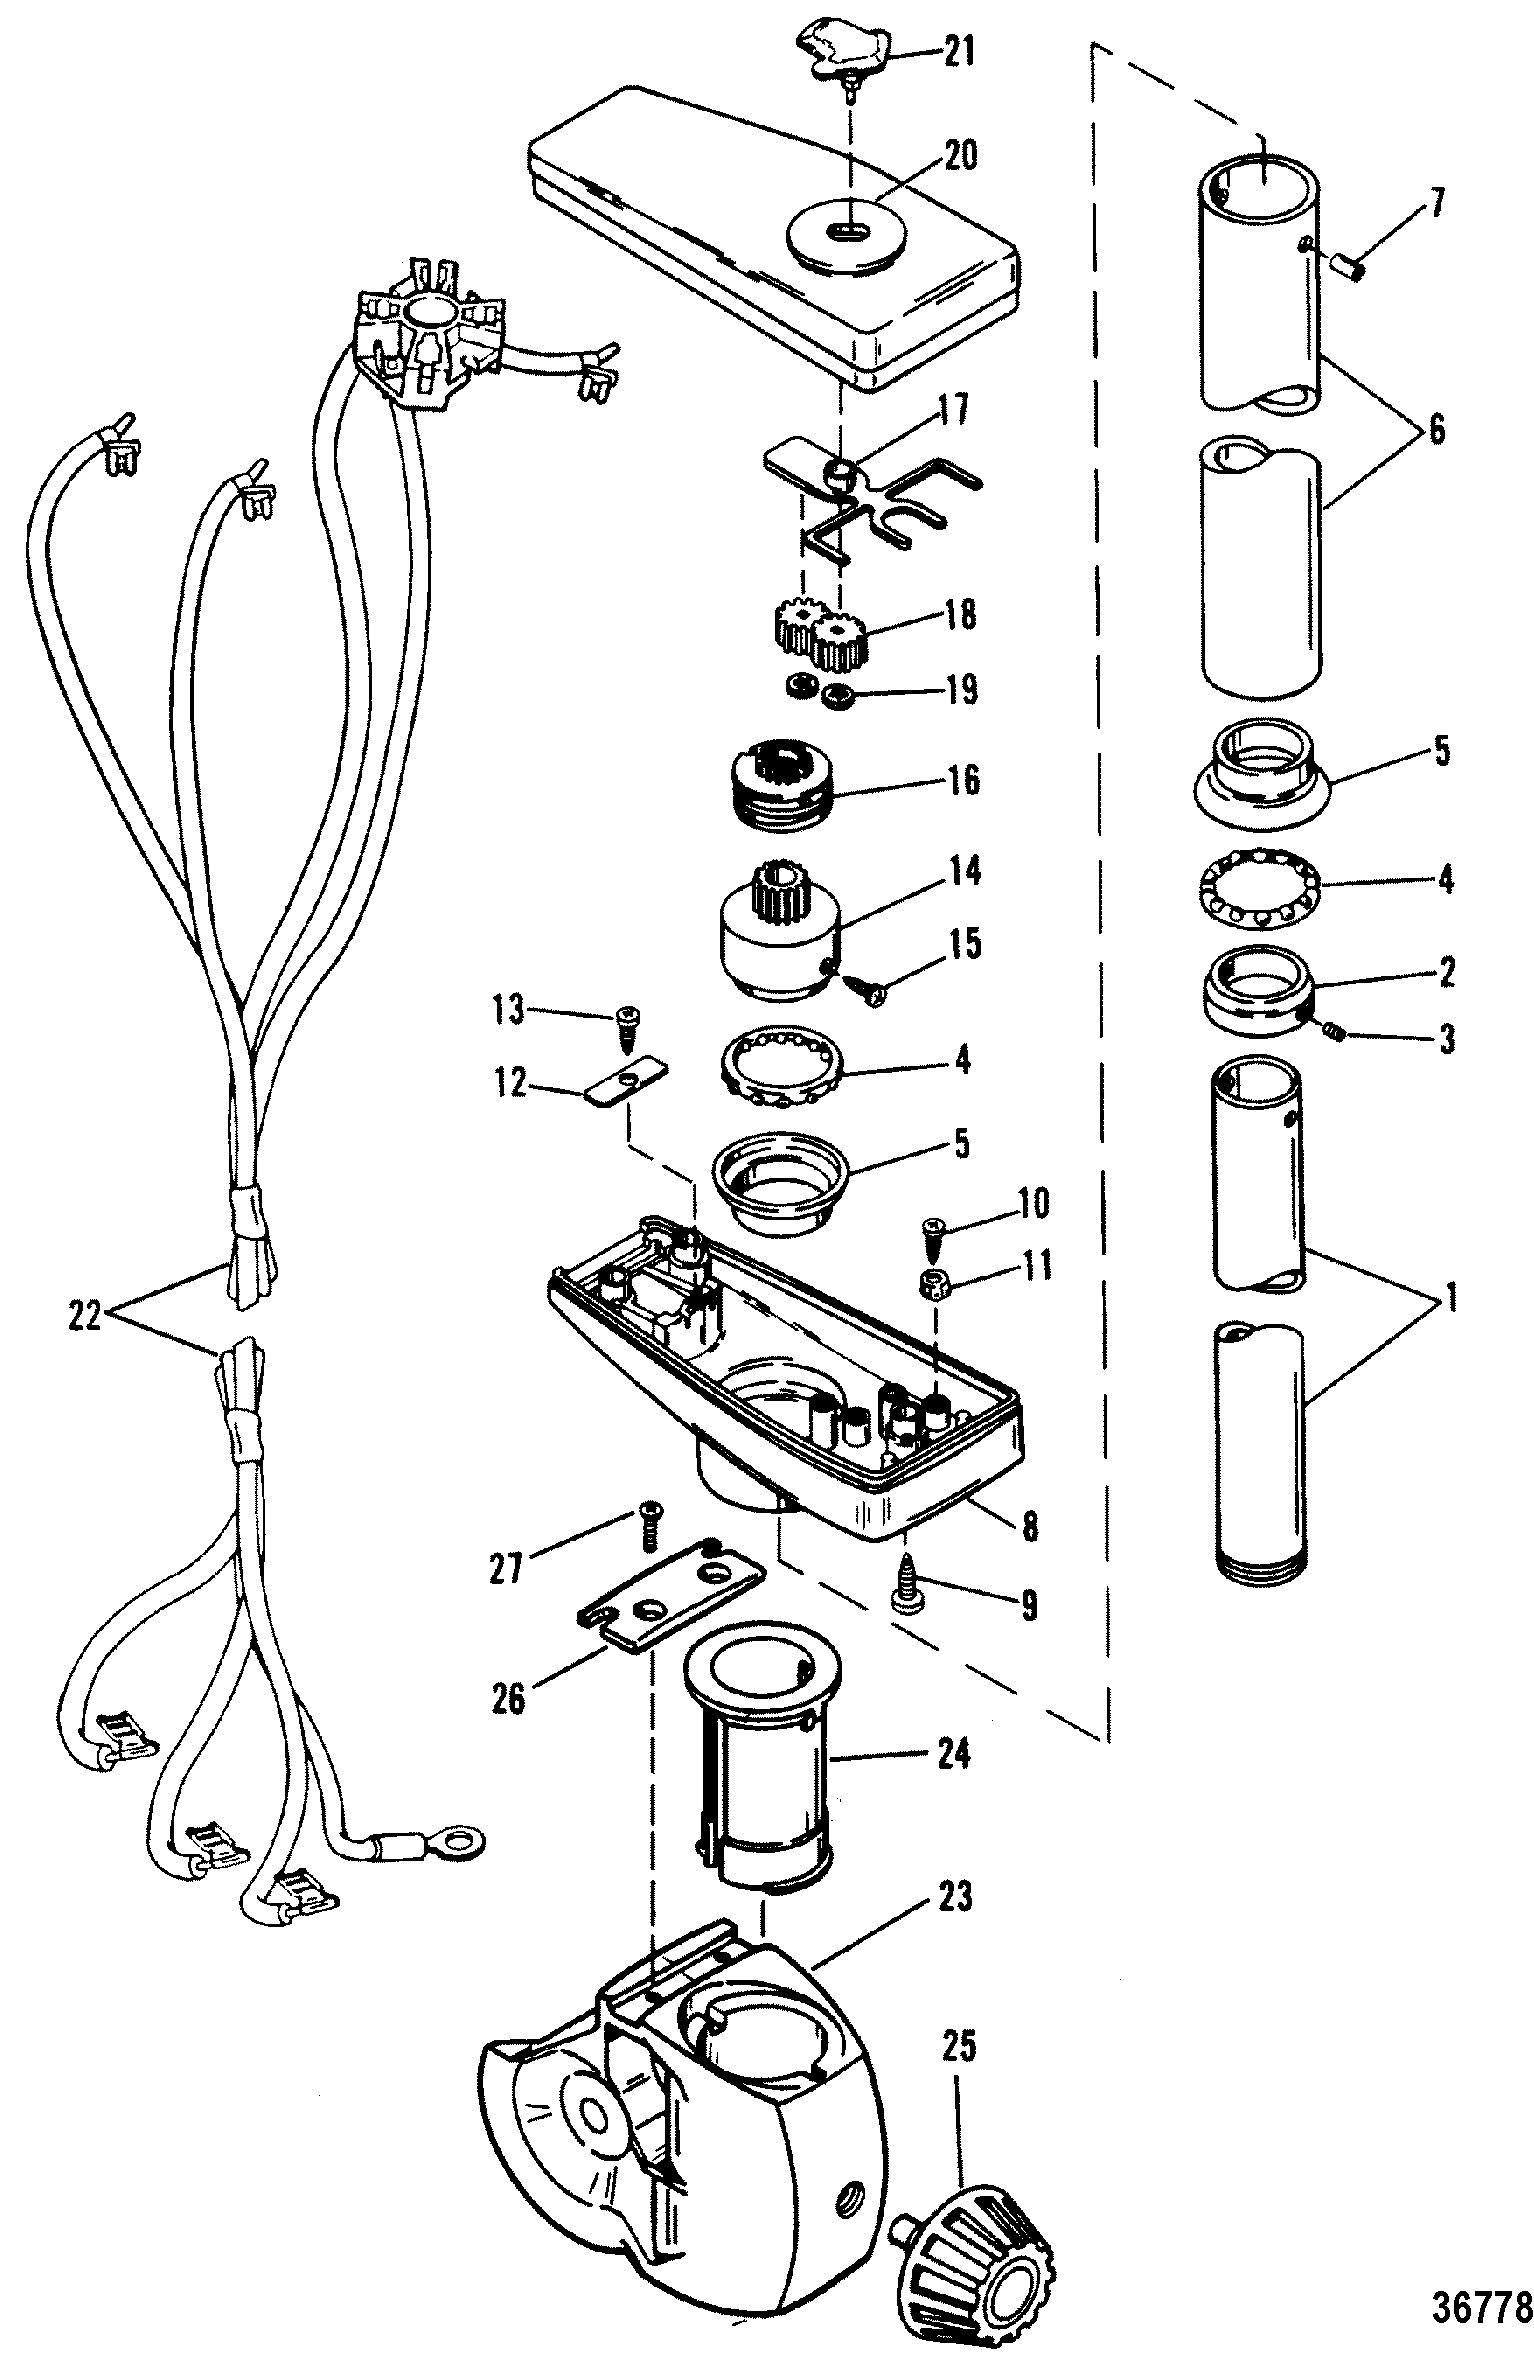 DRIVESHAFT AND CONTROL HOUSING(Remote Control)